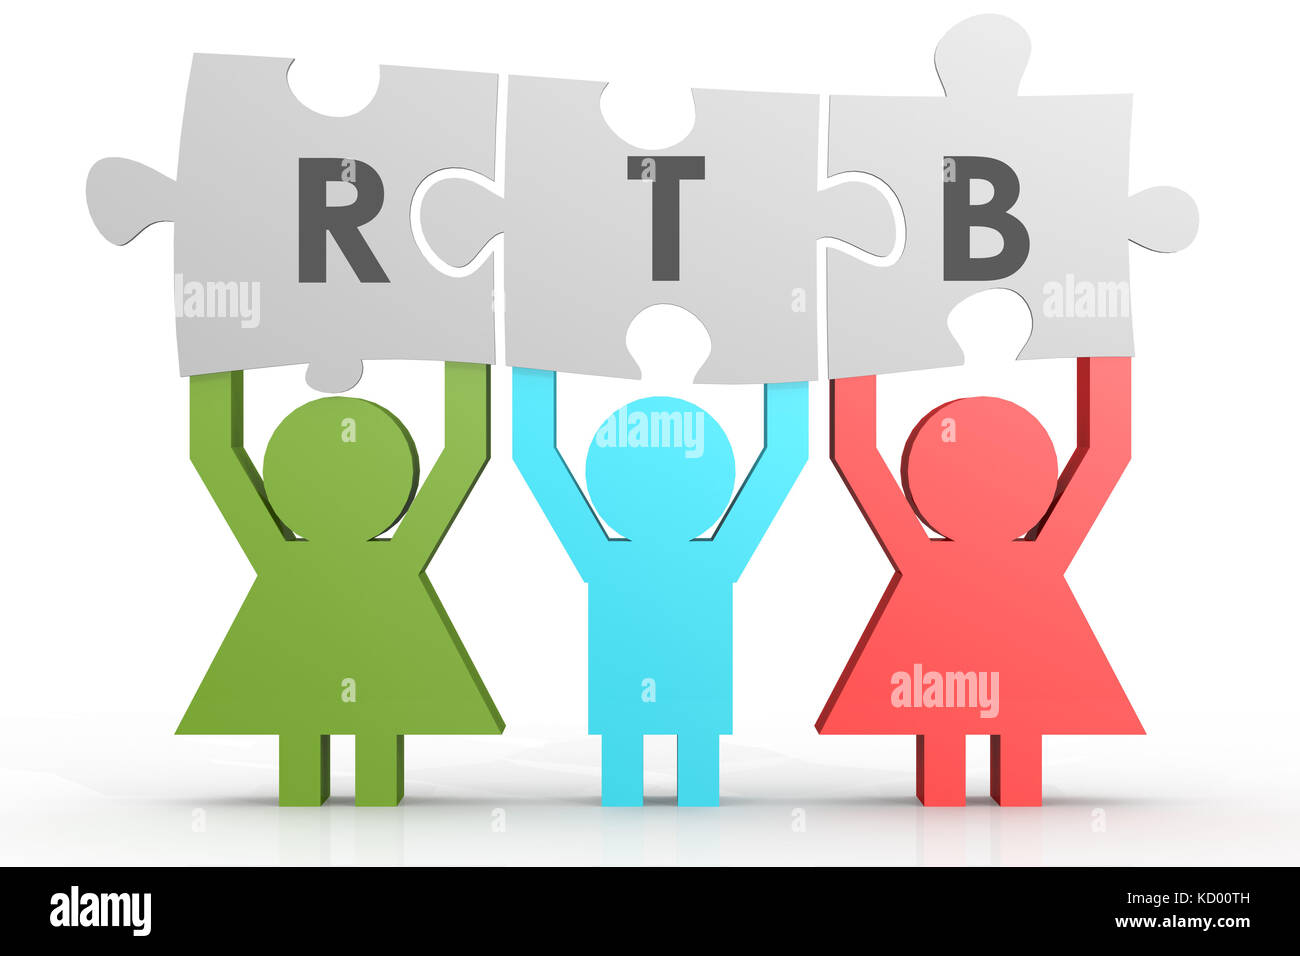 RTB - Real Time Bidding puzzle in a line image with hi-res rendered artwork that could be used for any graphic design. Stock Photo